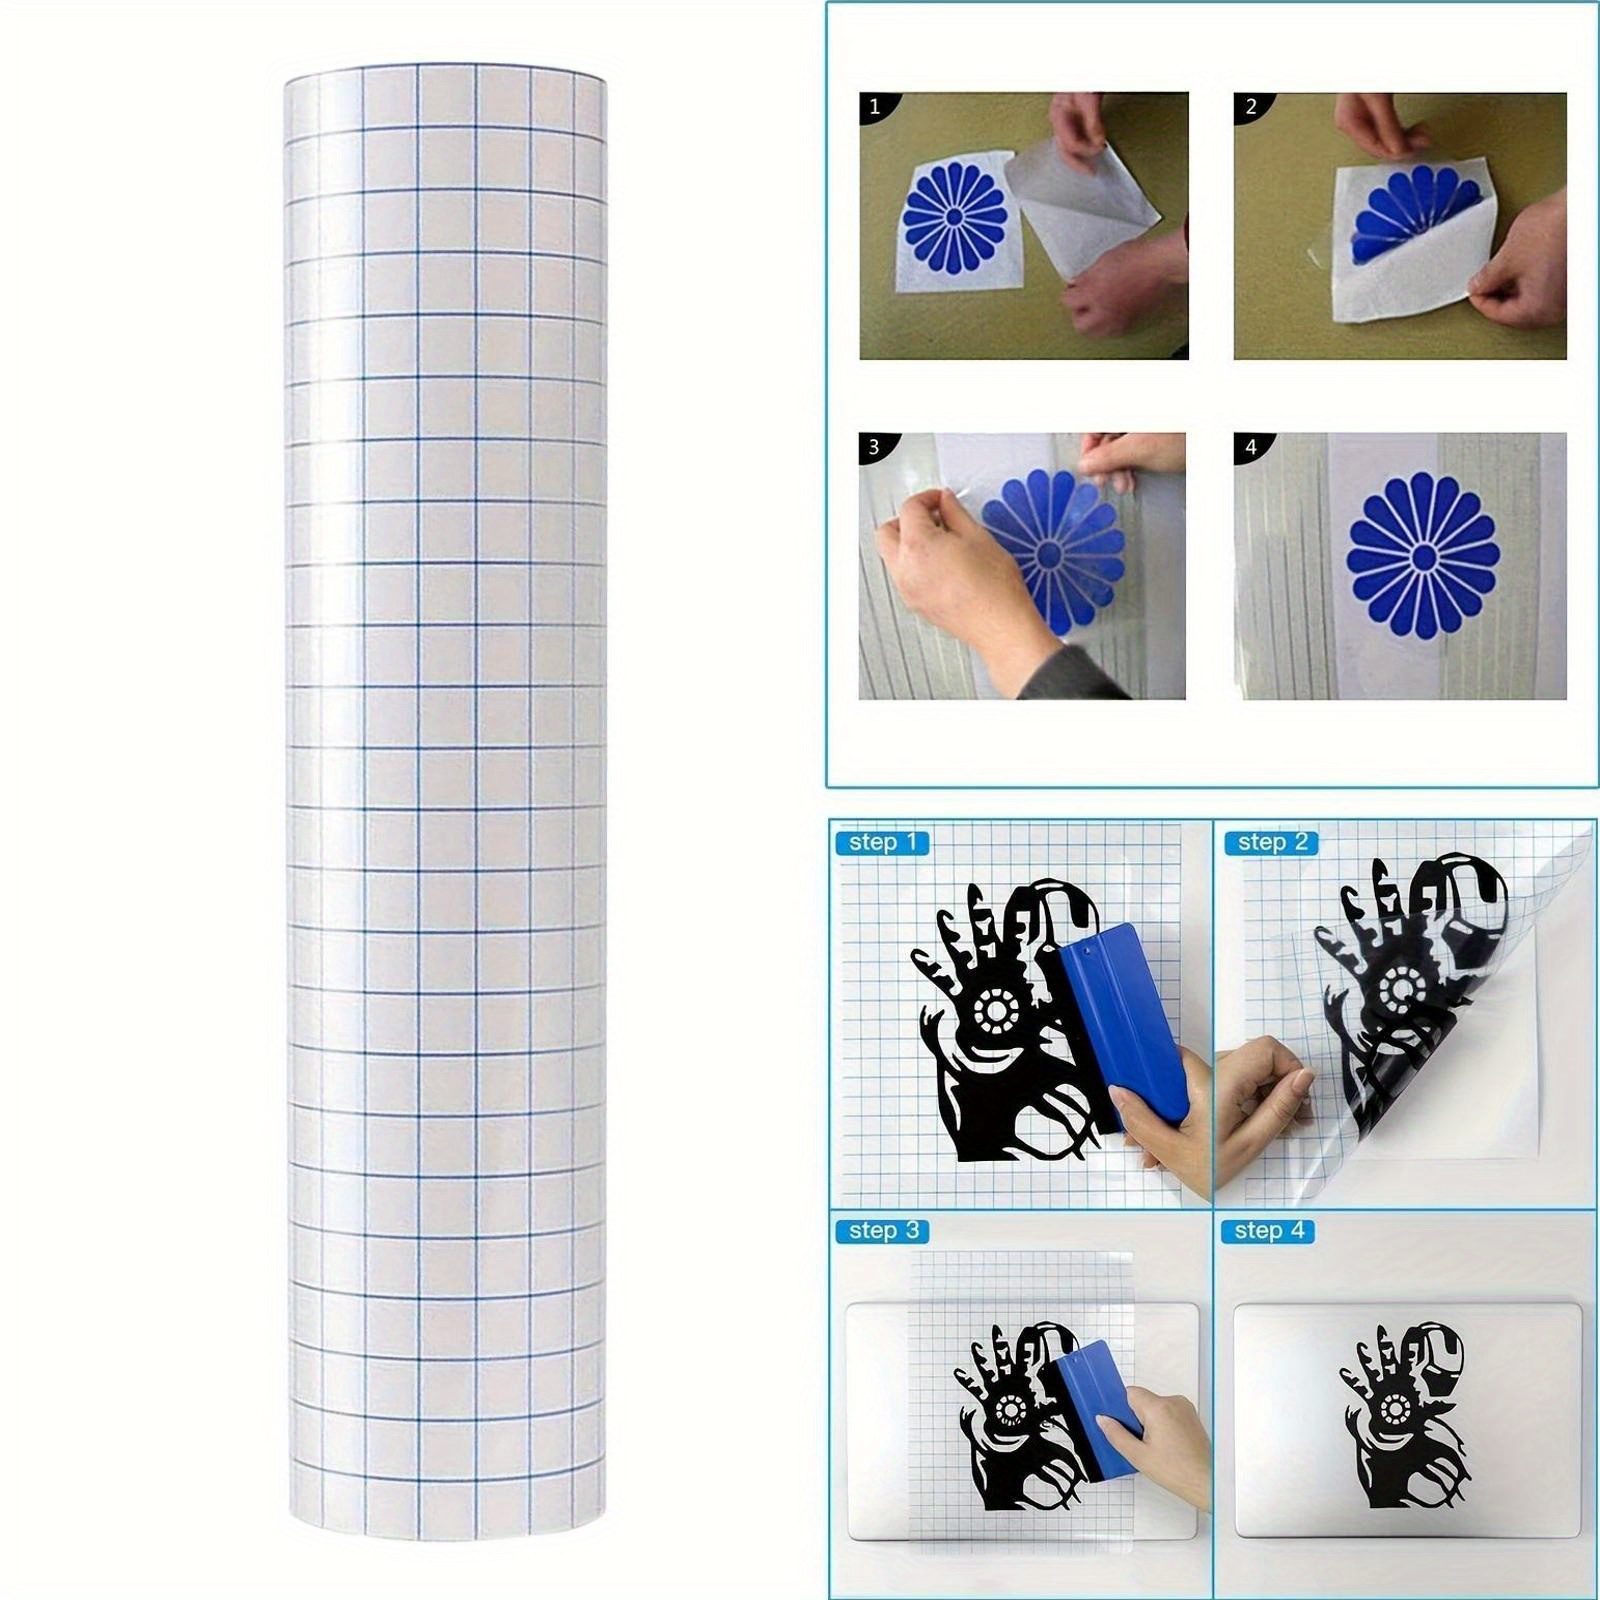 

Blue Pet Transfer Film For Vinyl Stickers - Self-adhesive, Perfect For Car Decals & Personalized Graphics, 1 Roll